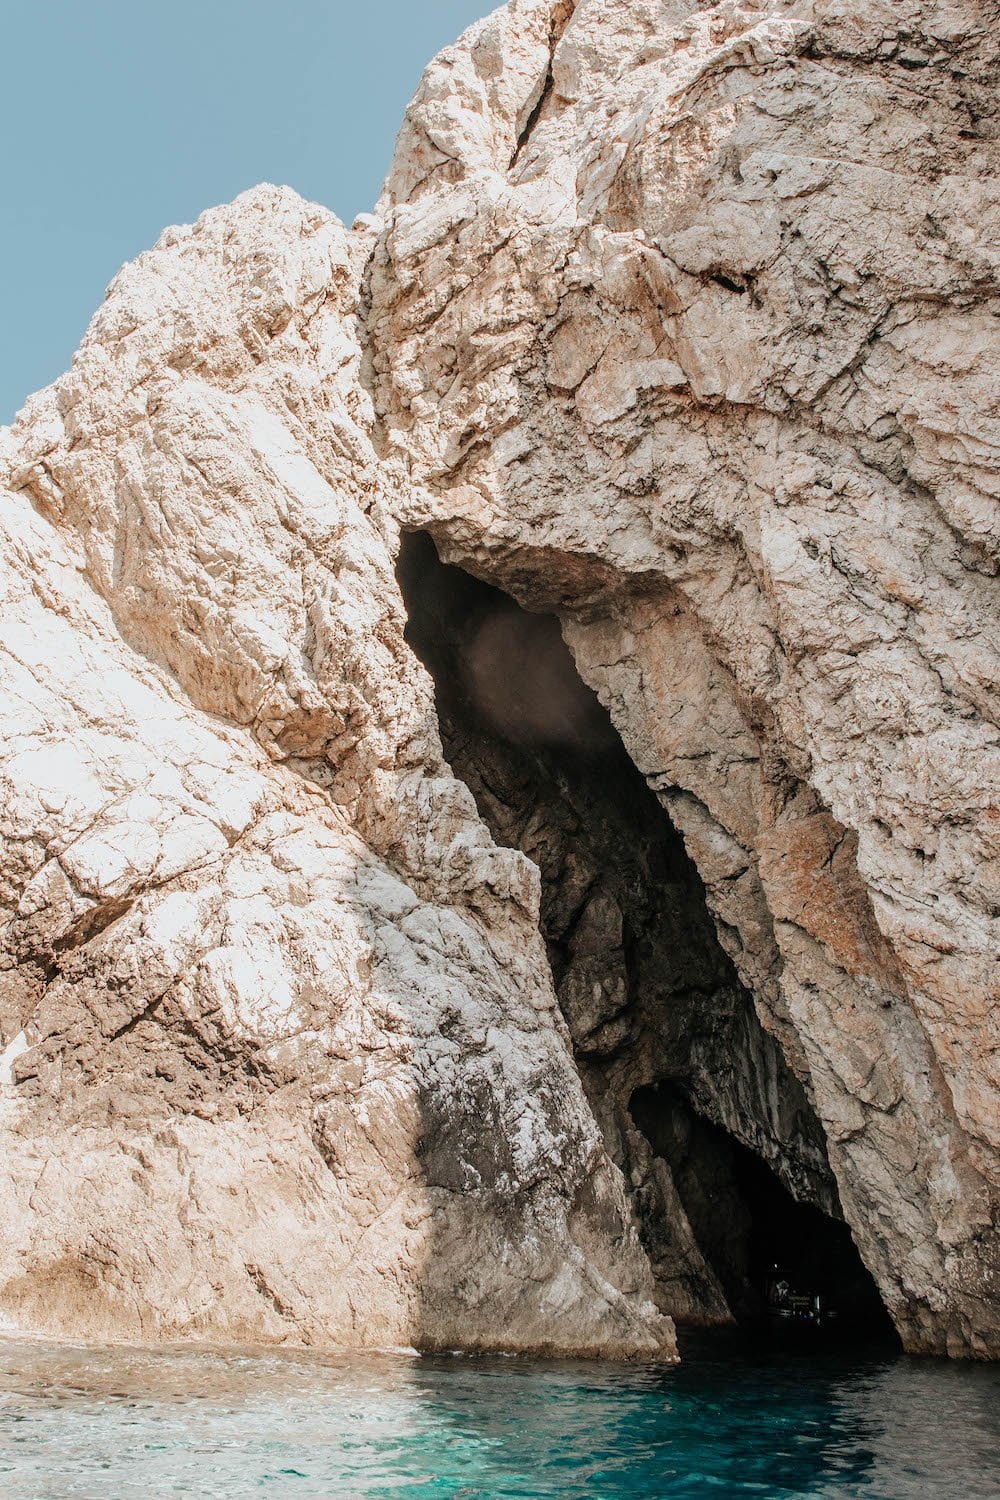 Tall cave opening in front of turquoise water - Monk Seal Cave, Croatia